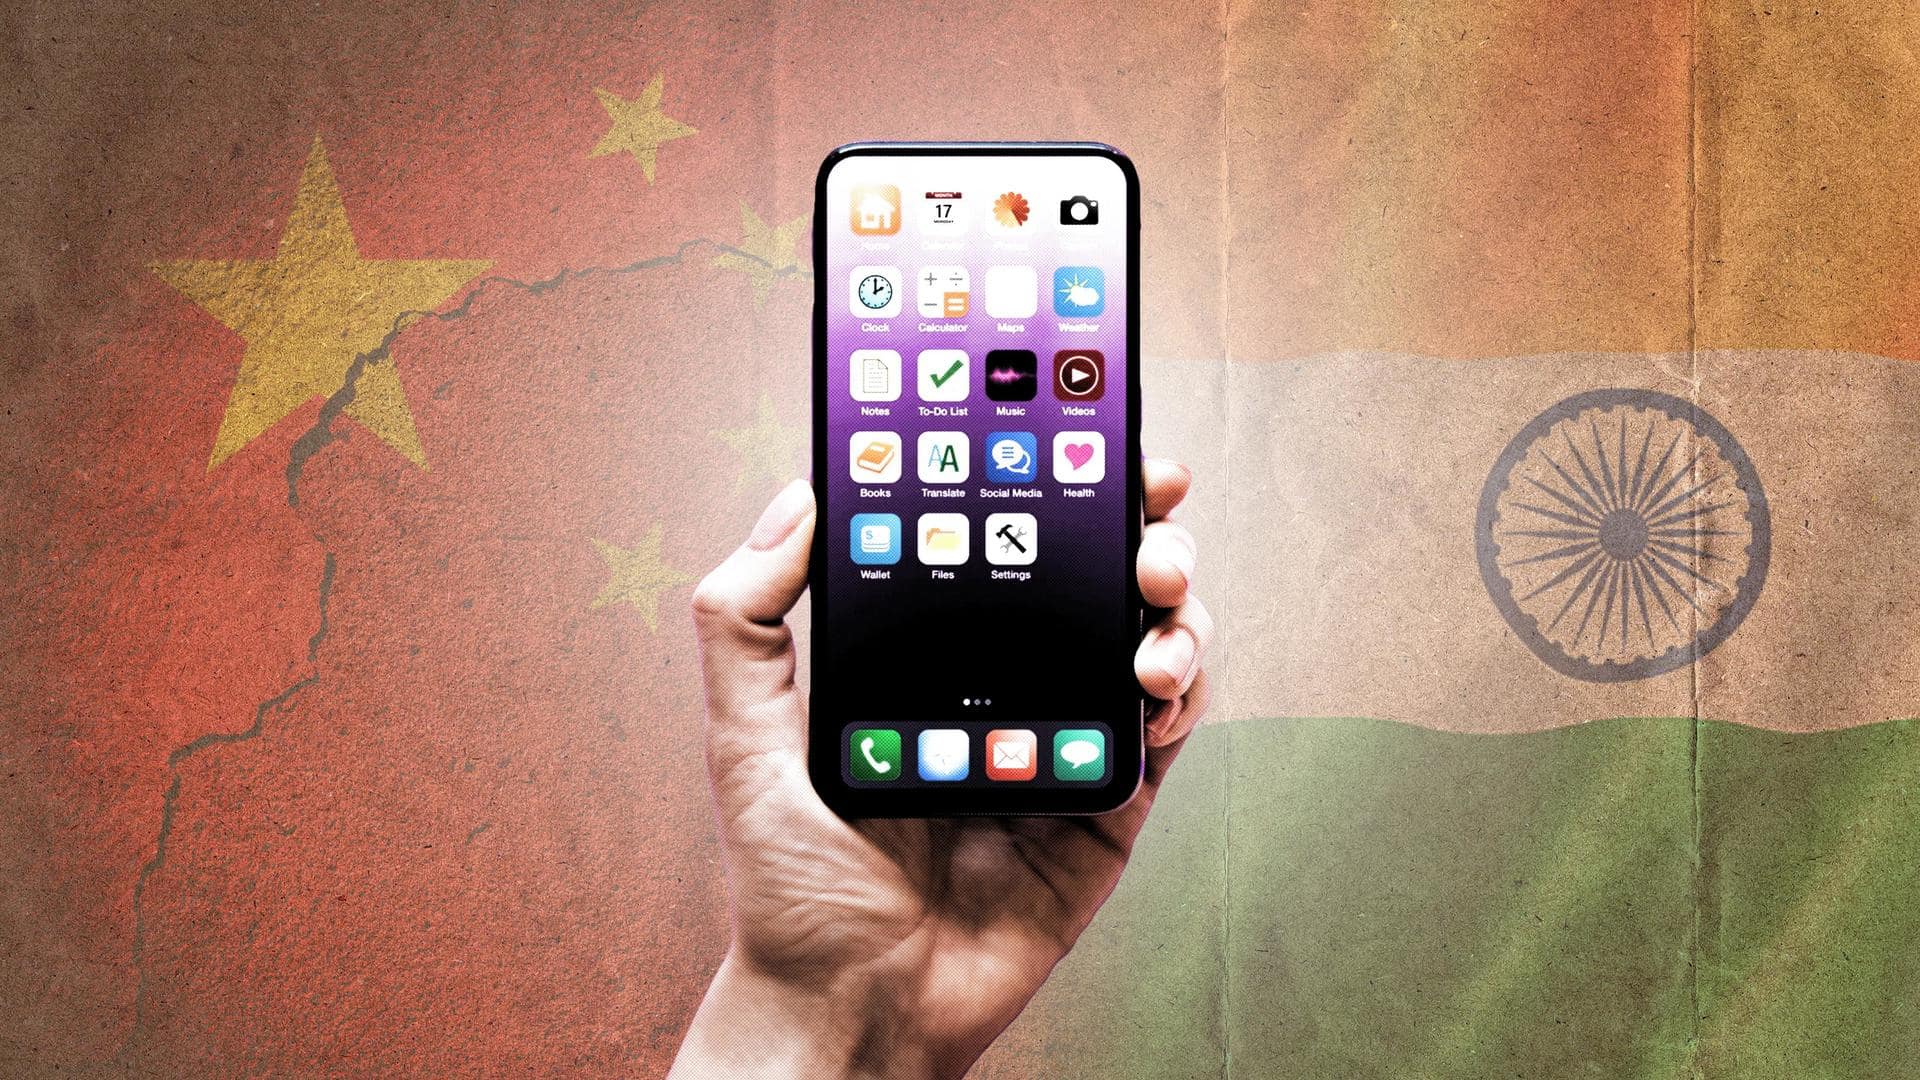 Appoint Indian CEOs: Centre to Chinese smartphone companies